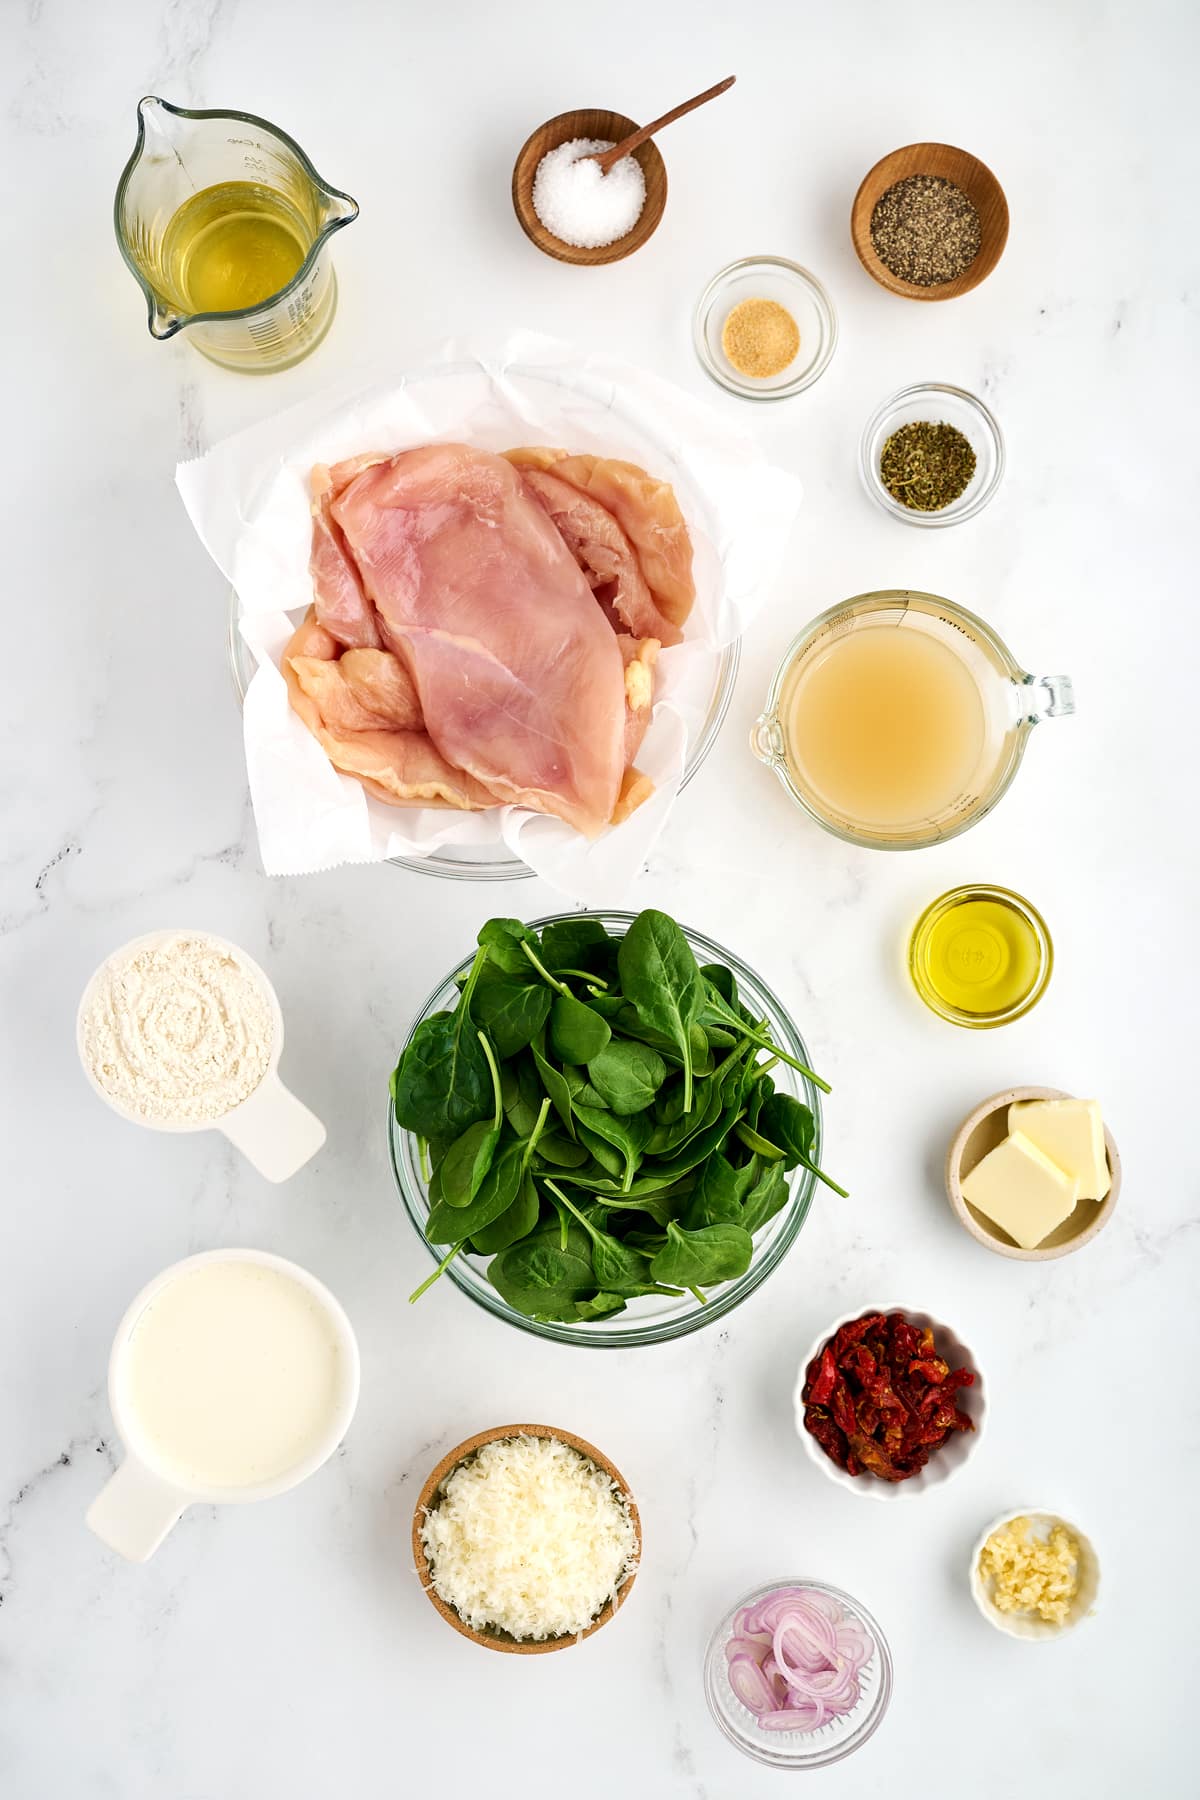 Ingredients for chicken florentine include boneless and skinless chicken breasts, kosher salt, black pepper, garlic powder, Italian seasoning, all-purpose flour, extra virgin olive oil, butter, fresh garlic cloves, shallots, dry white wine, chicken broth, heavy cream, freshly grated parmesan cheese, fresh baby spinach leaves, and sliced sun-dried tomatoes.